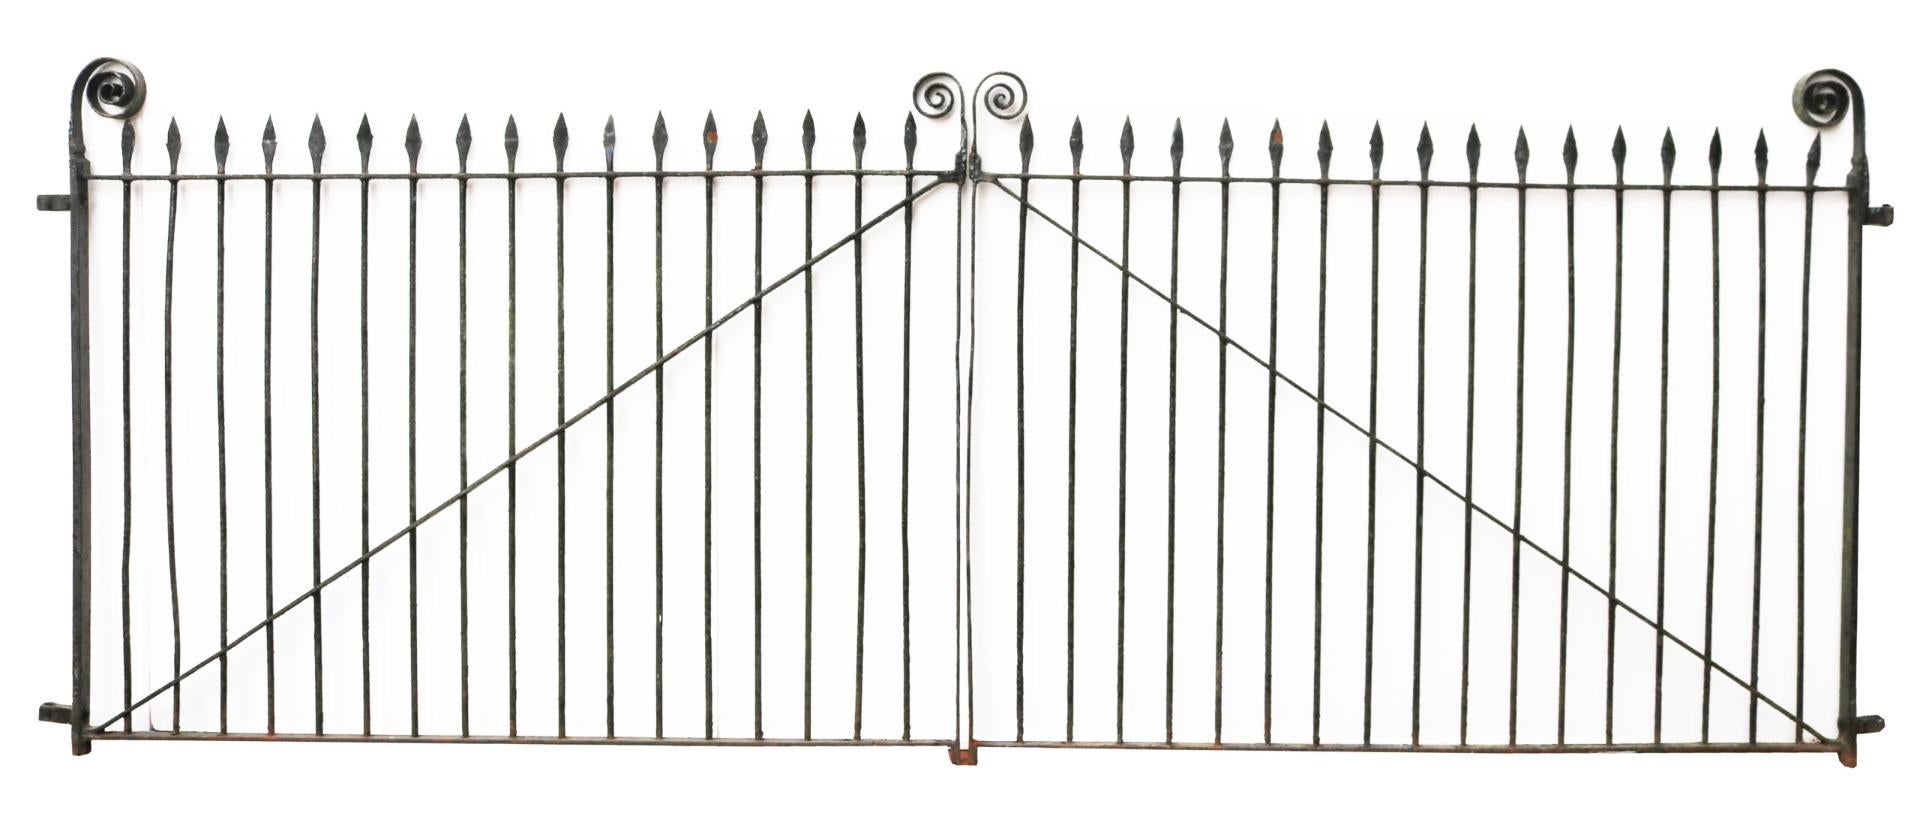 A set of very wide mid-Victorian wrought iron driveway gates with spear finials and scrolling ends.

Additional Dimensions:

For an opening of approximately 400 cm